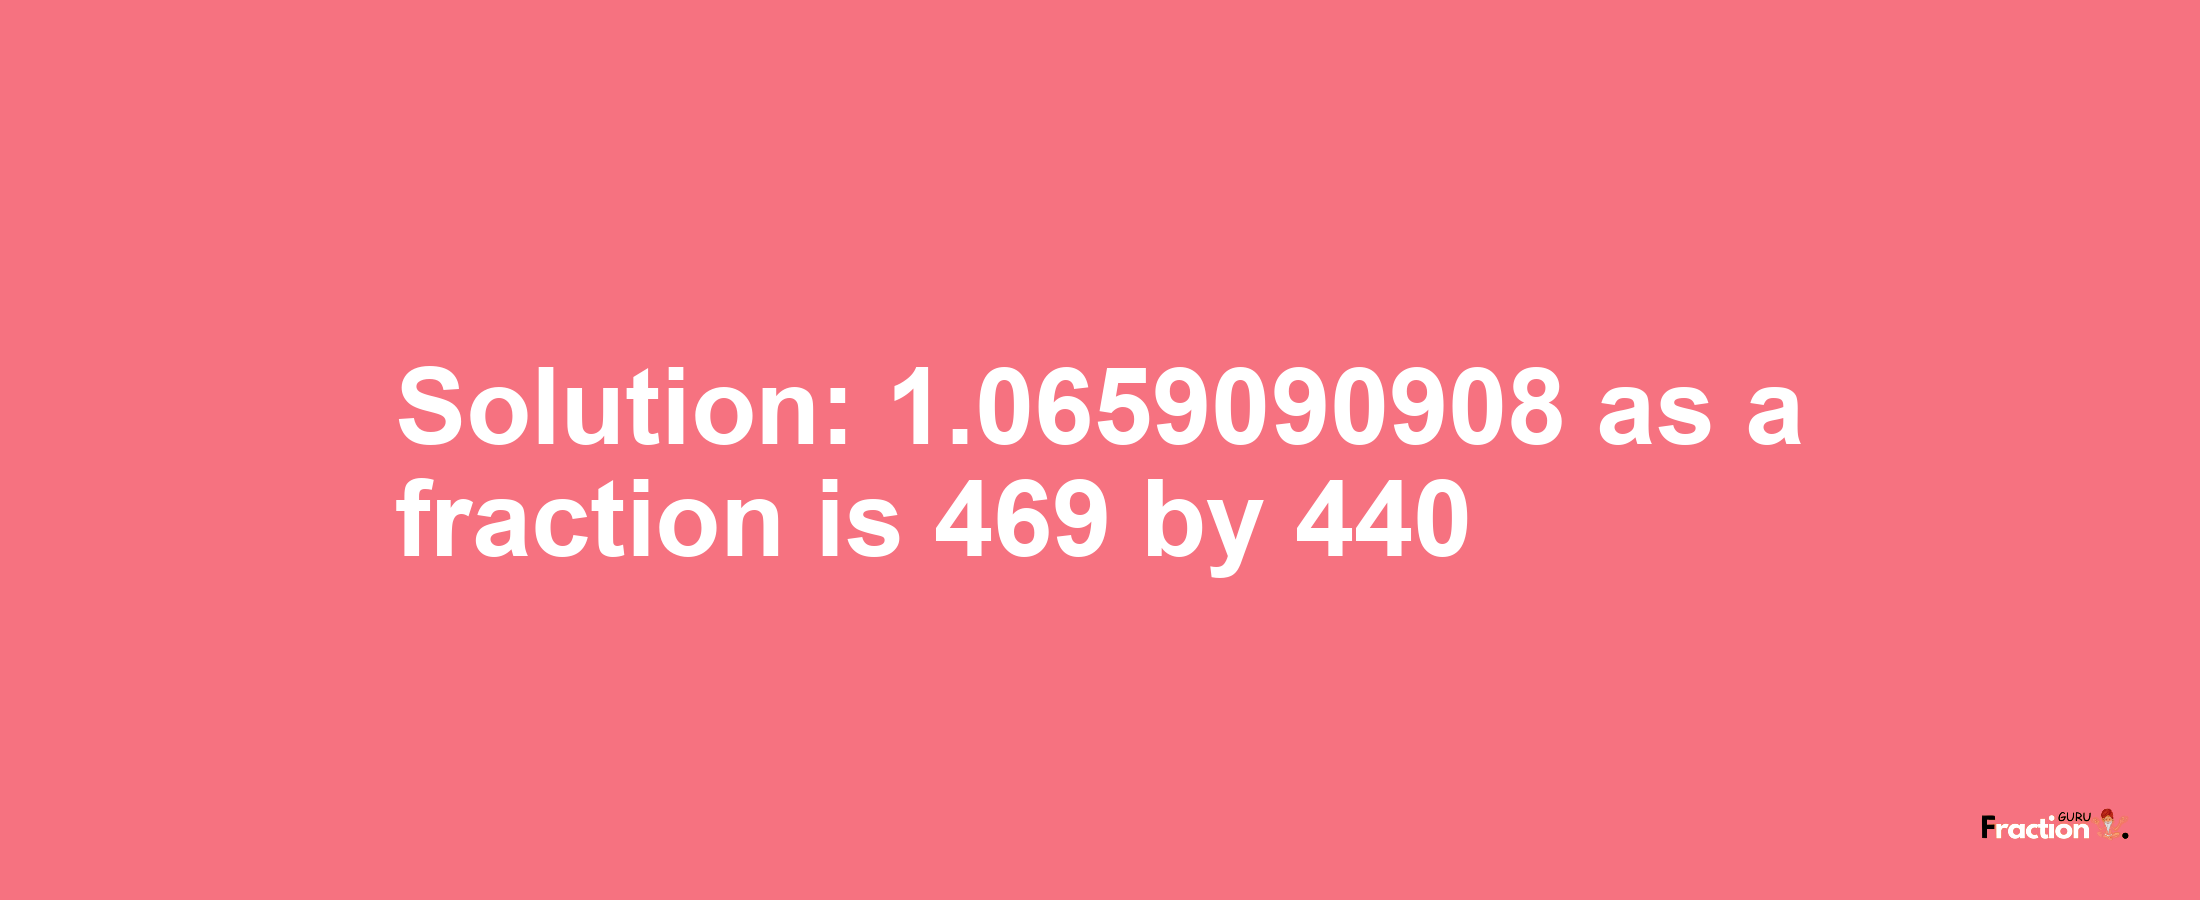 Solution:1.0659090908 as a fraction is 469/440